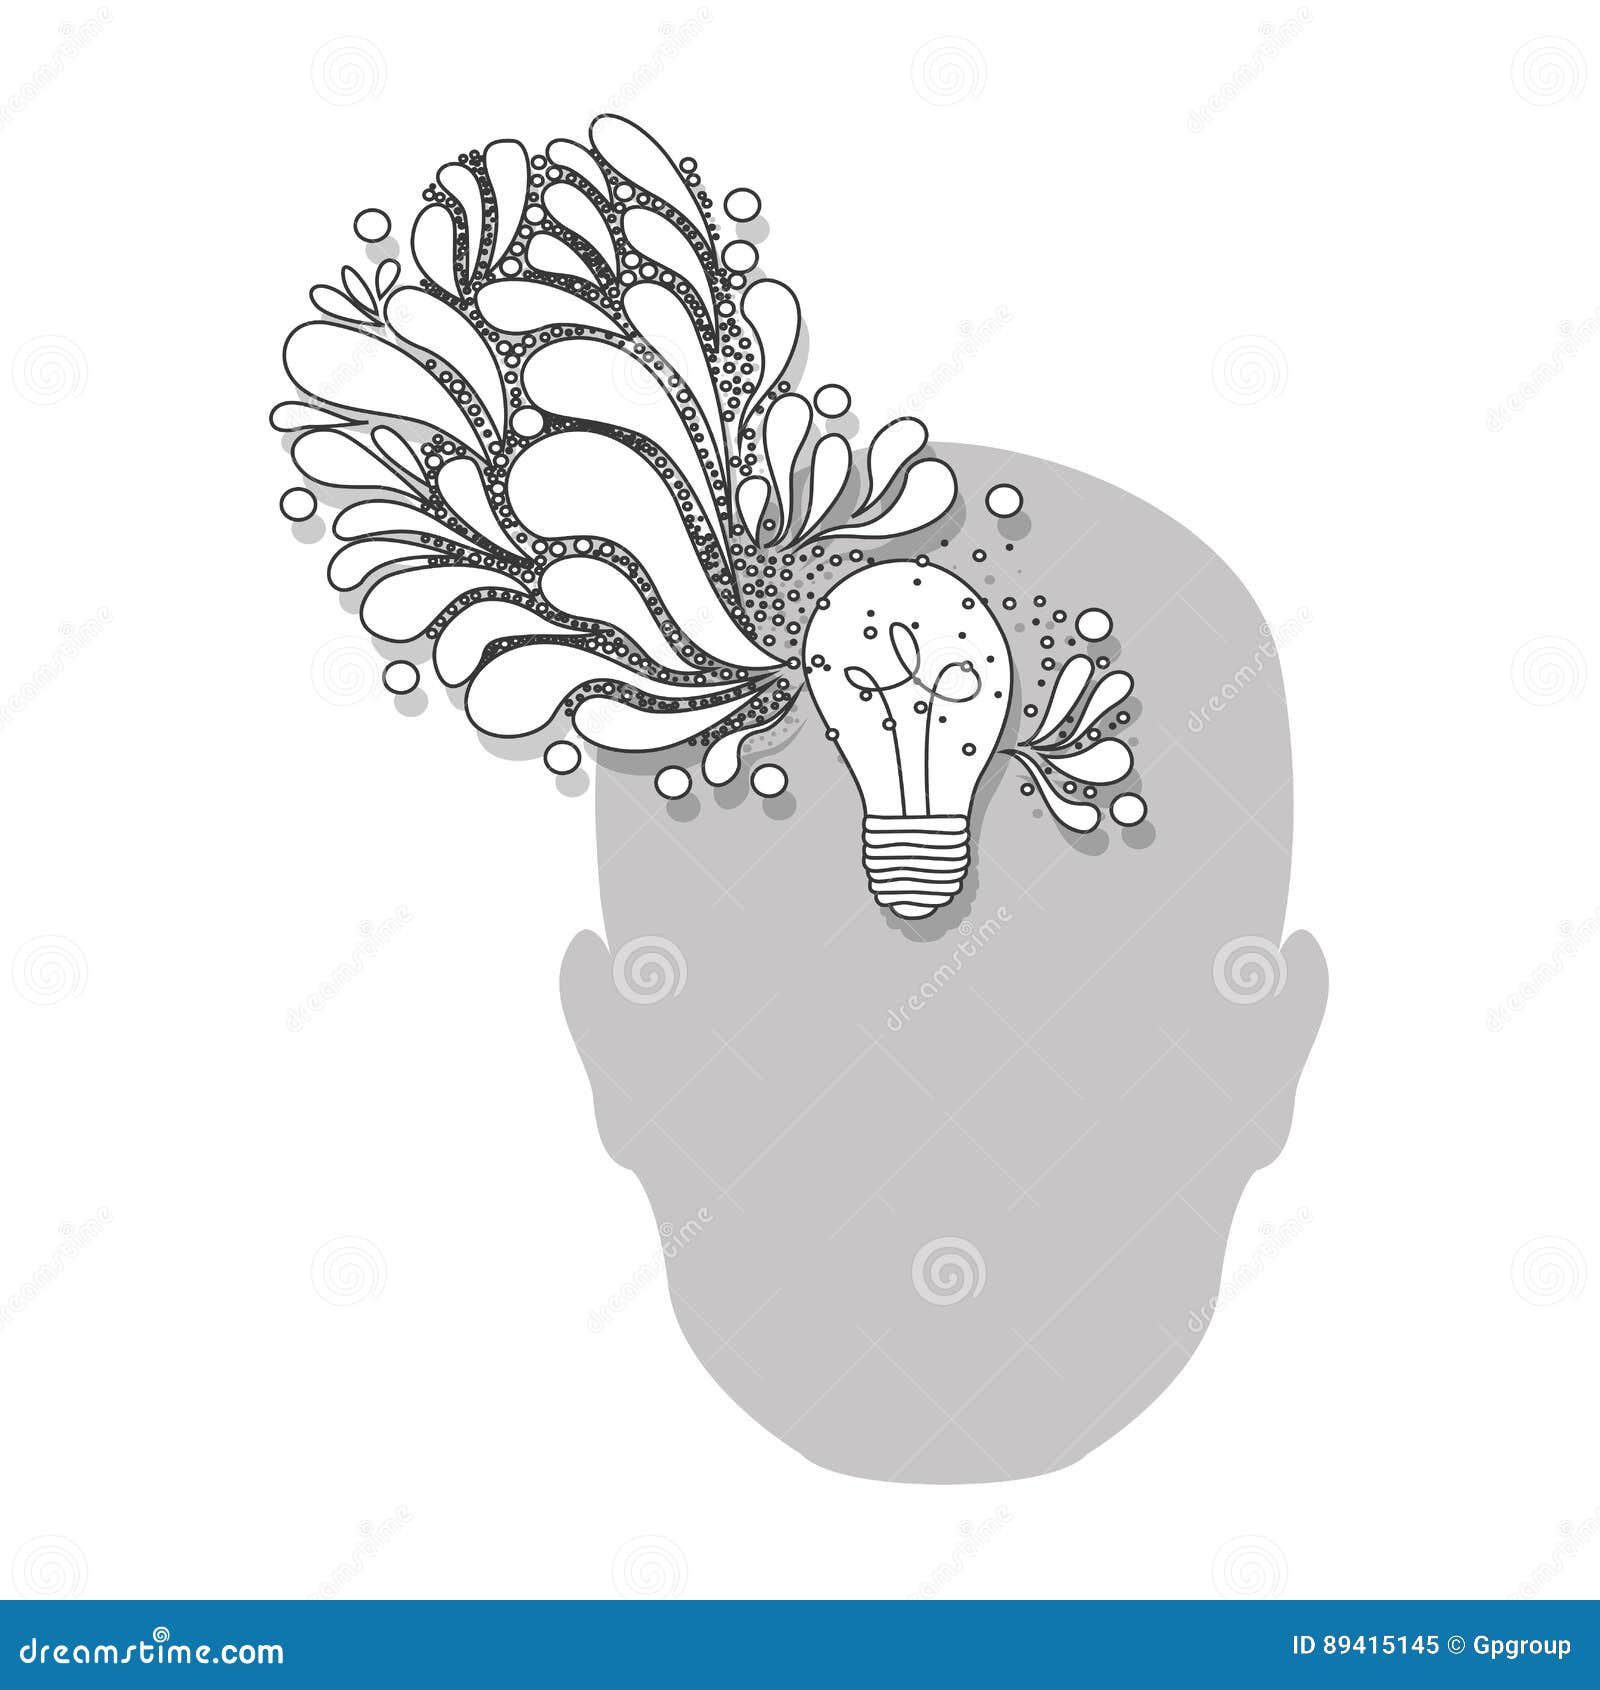 Person with Bulb Brain Icon Stock Illustration - Illustration of light ...